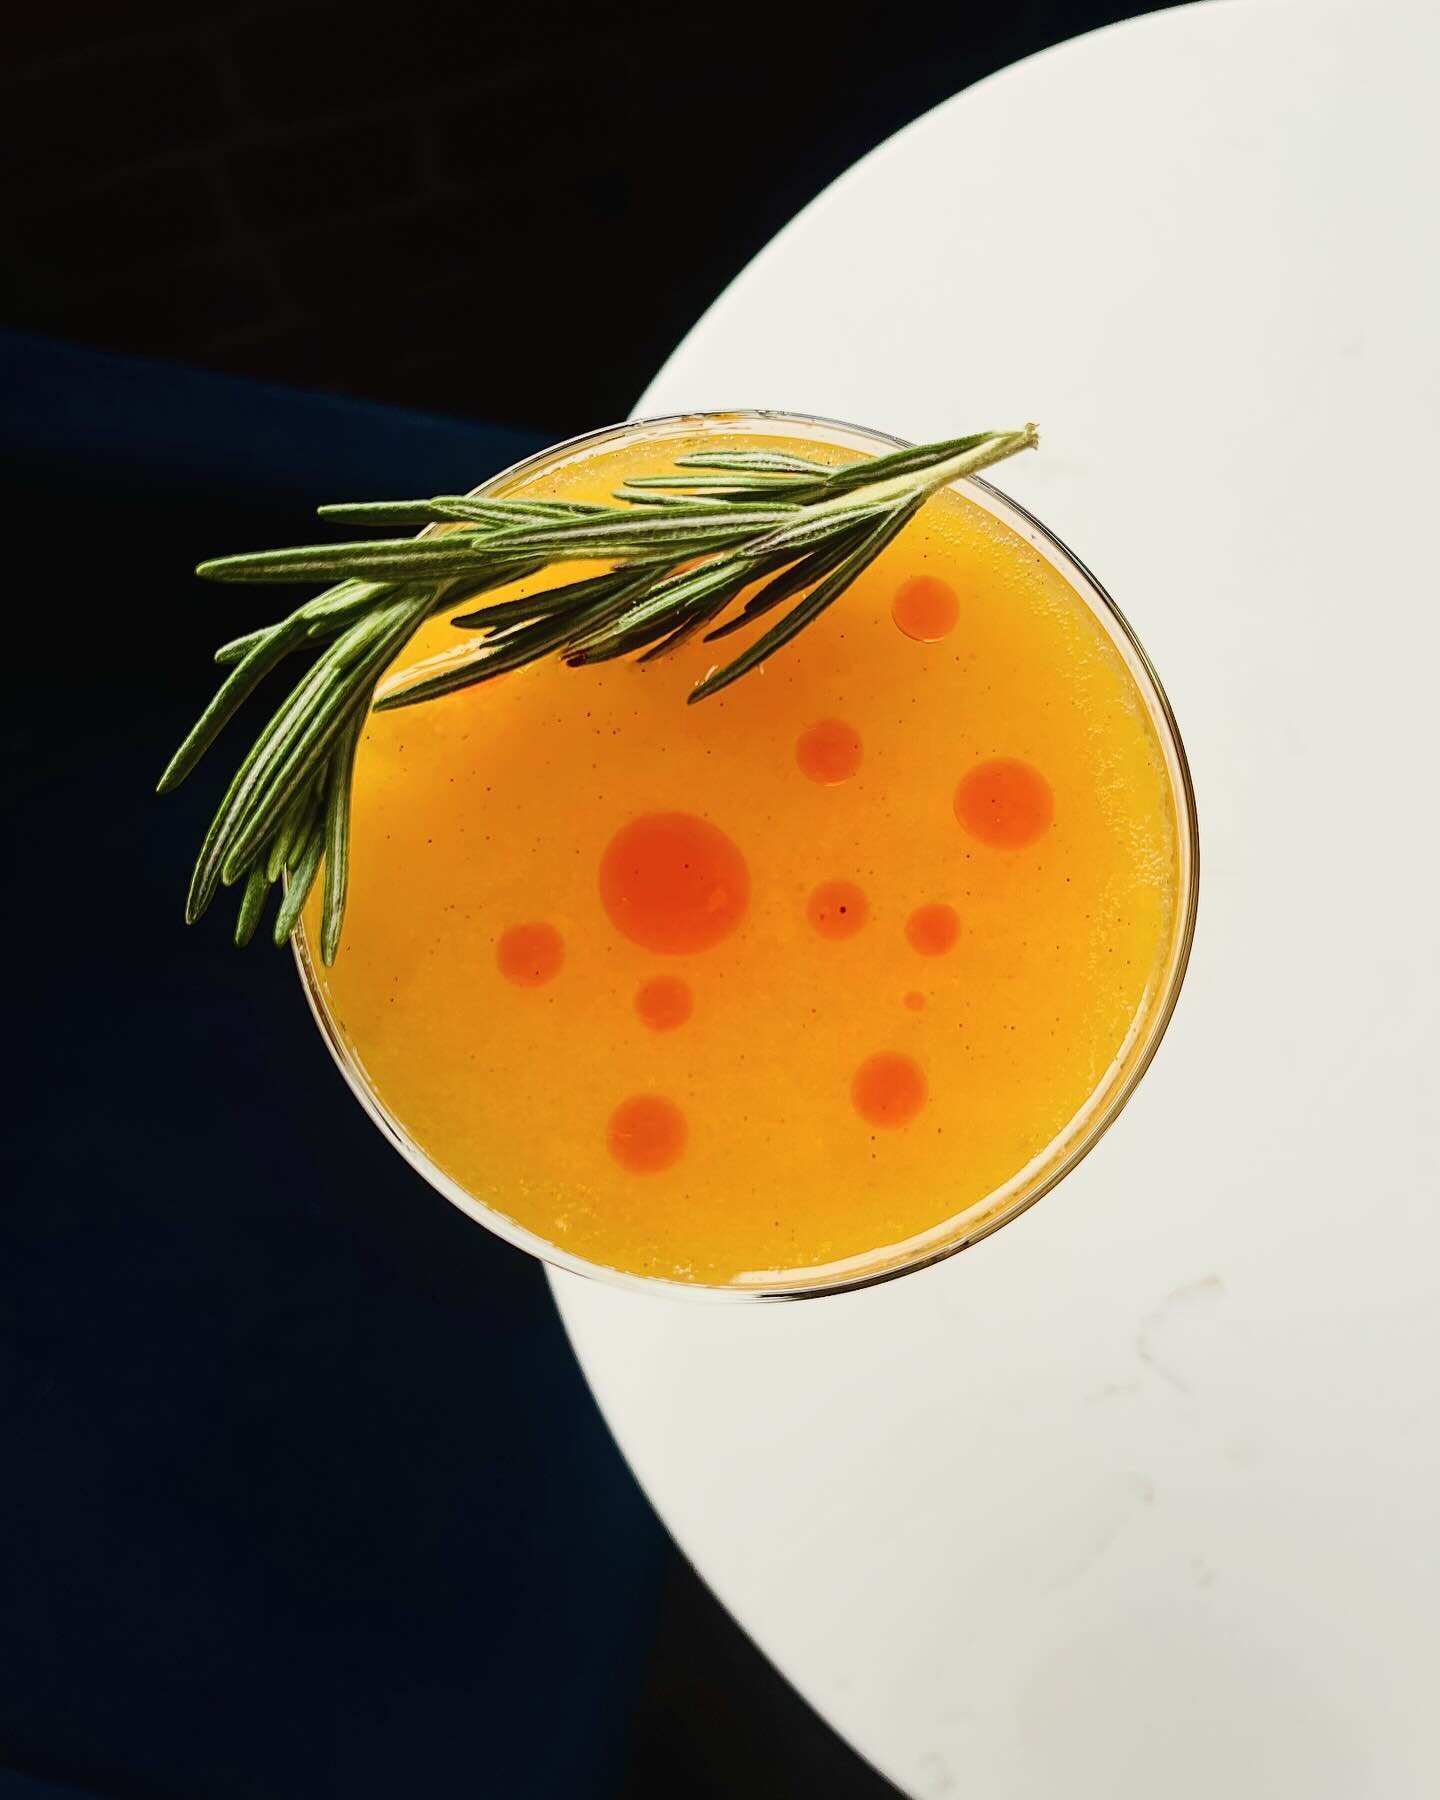 The best way to welcome the weekend. Try our new seasonal cocktails crafted by @nicoleshaver_ 

#historicstarlounge #cocktails #midtownsacramento #craftcocktails #cocktailbar #sacramento #hyatthouse #orange